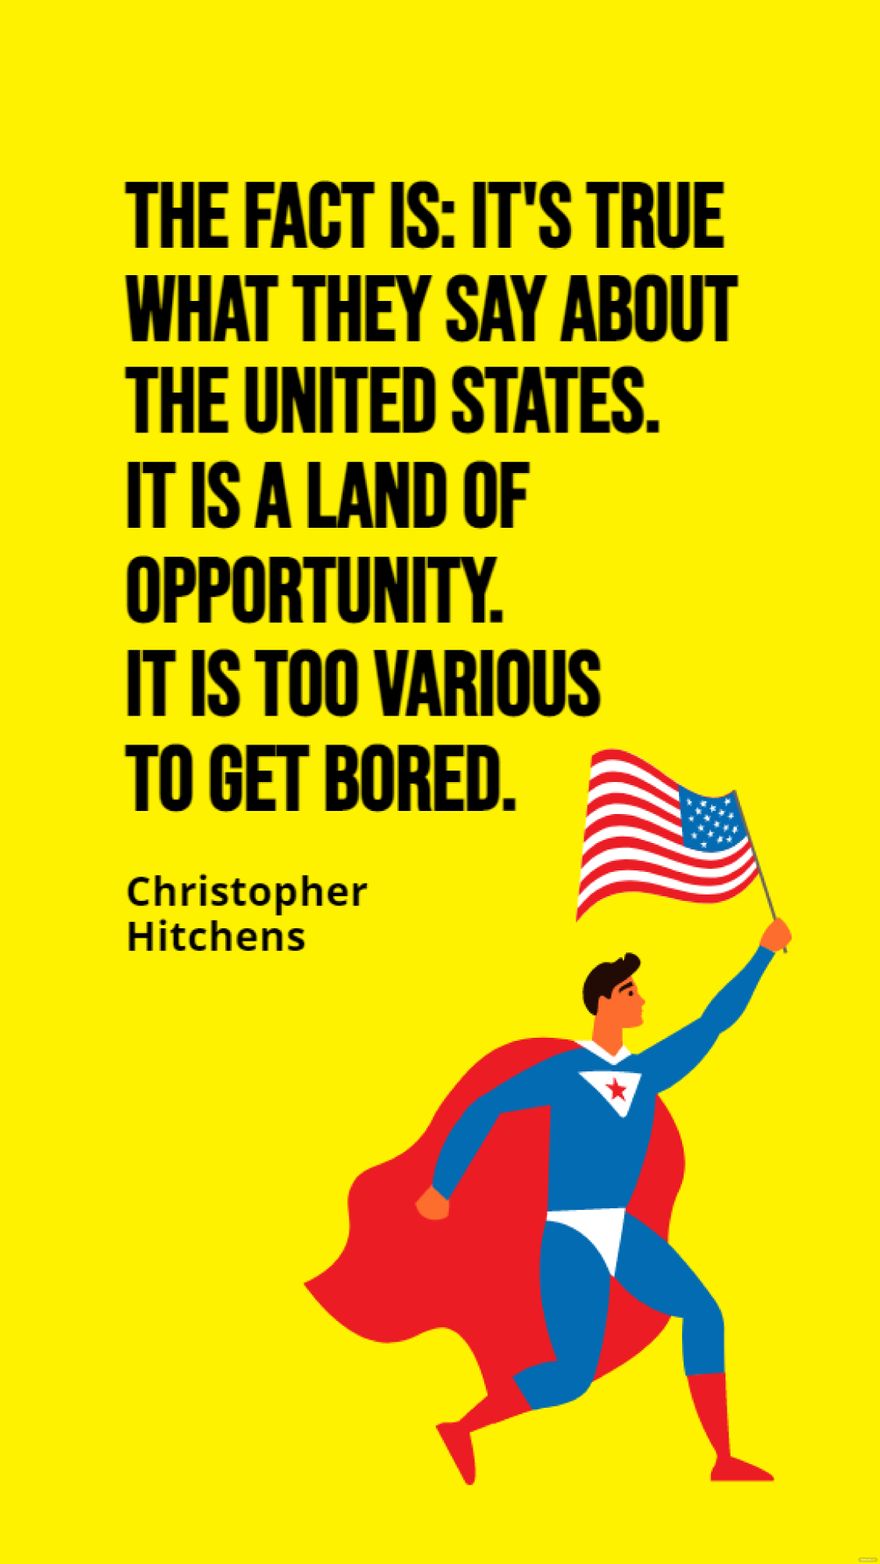 Free Christopher Hitchens - The fact is: It's true what they say about the United States. It is a land of opportunity. It is too various to get bored